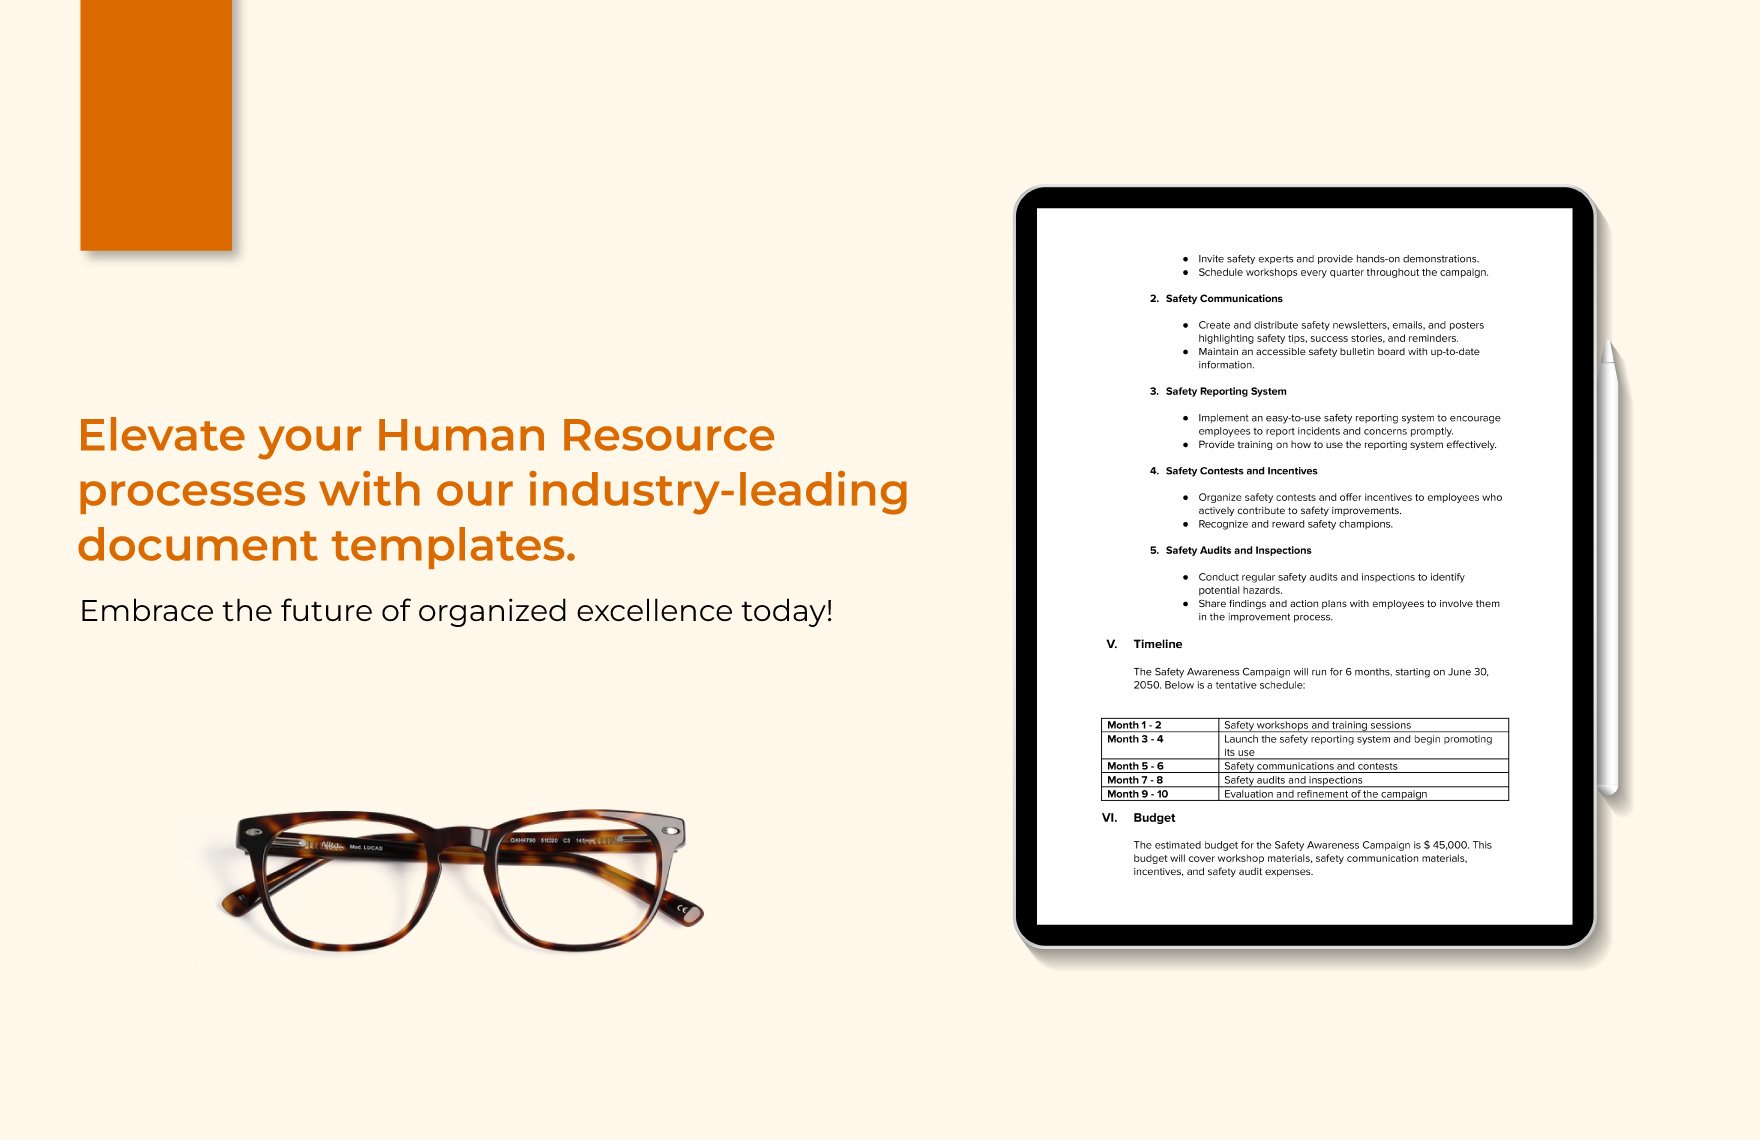 Safety Awareness Campaign Plan HR Template